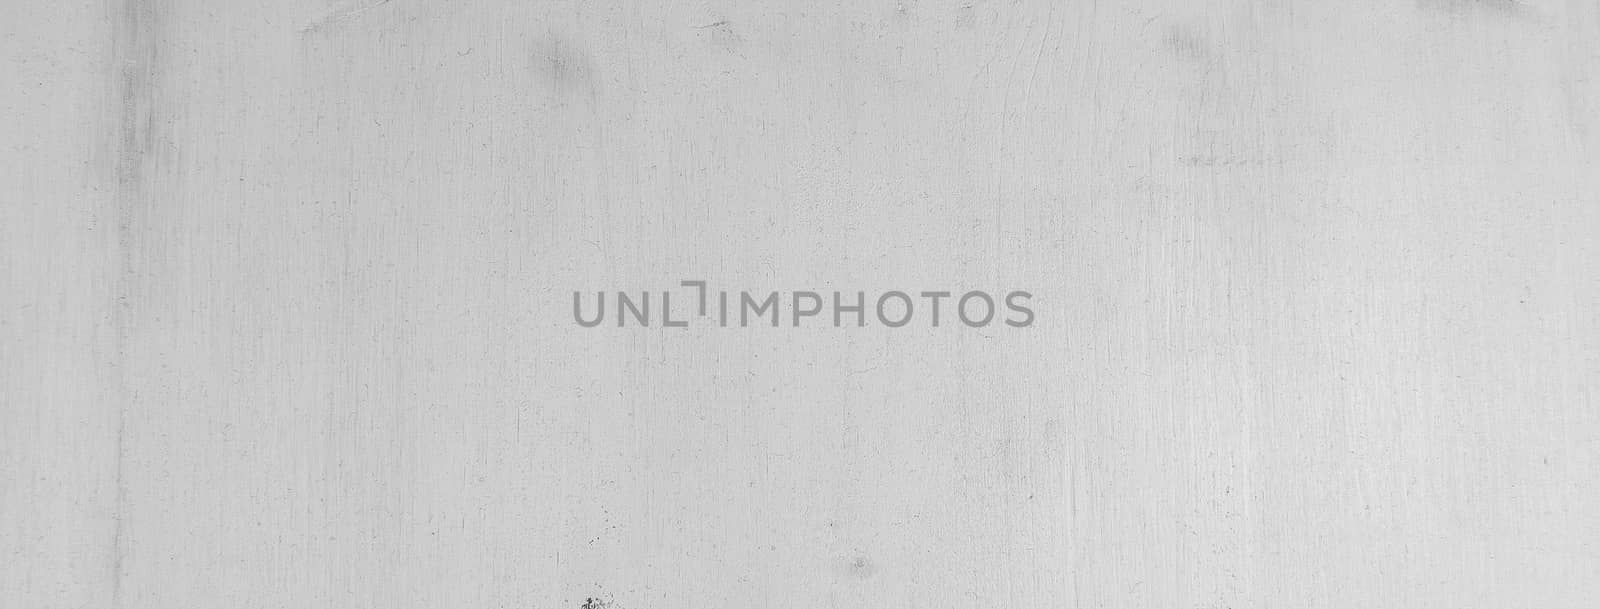 Texture of a white wooden board. May be used as background